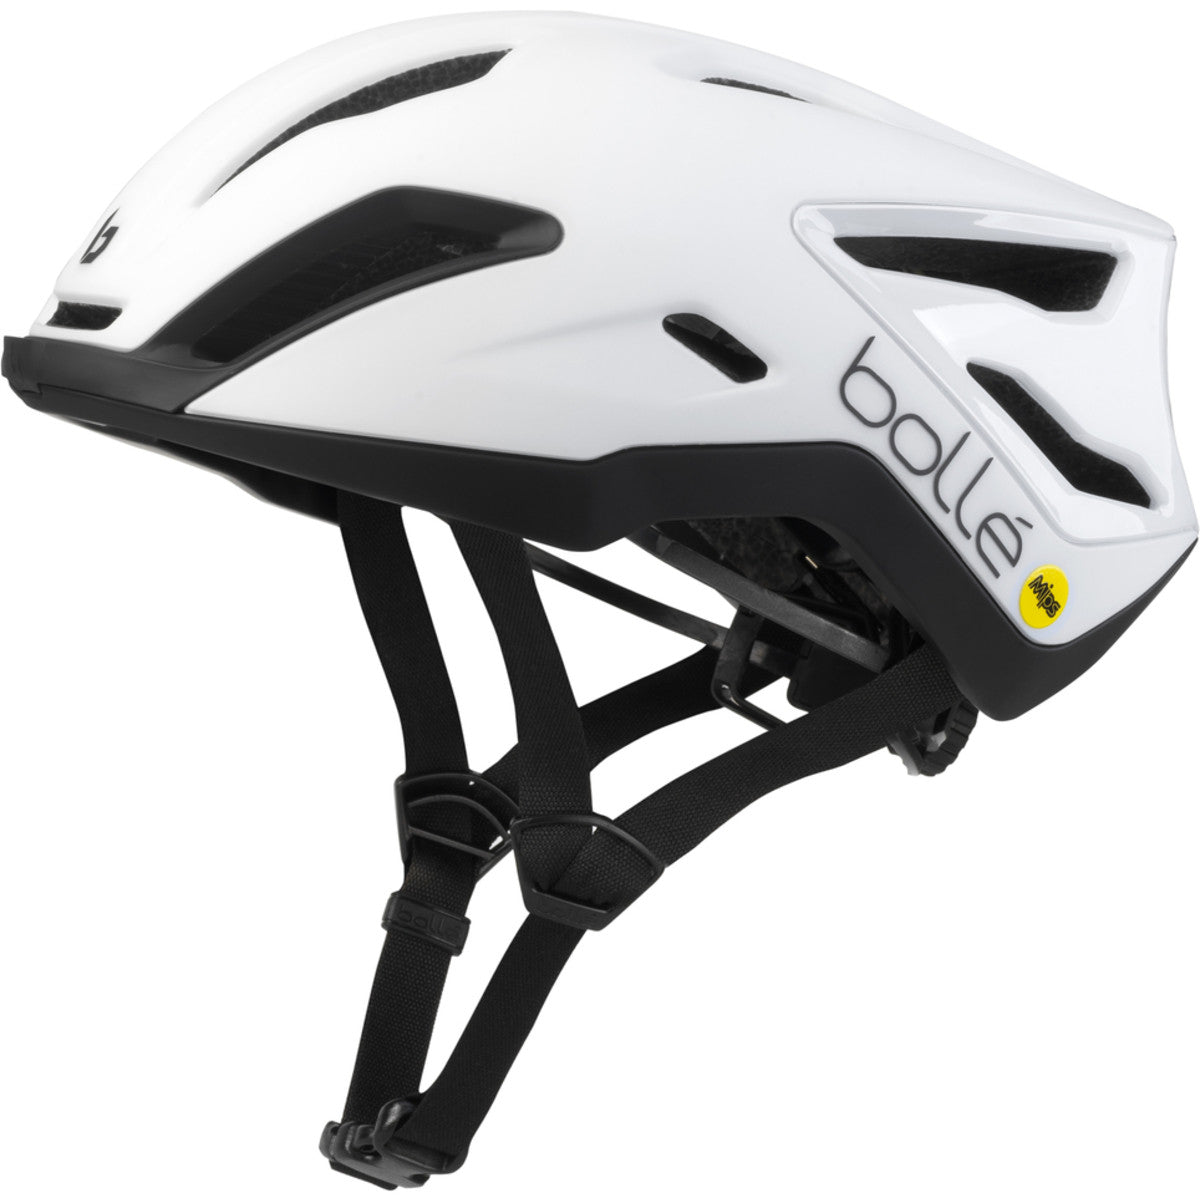 Bolle Exo Mips Cycling Helmet